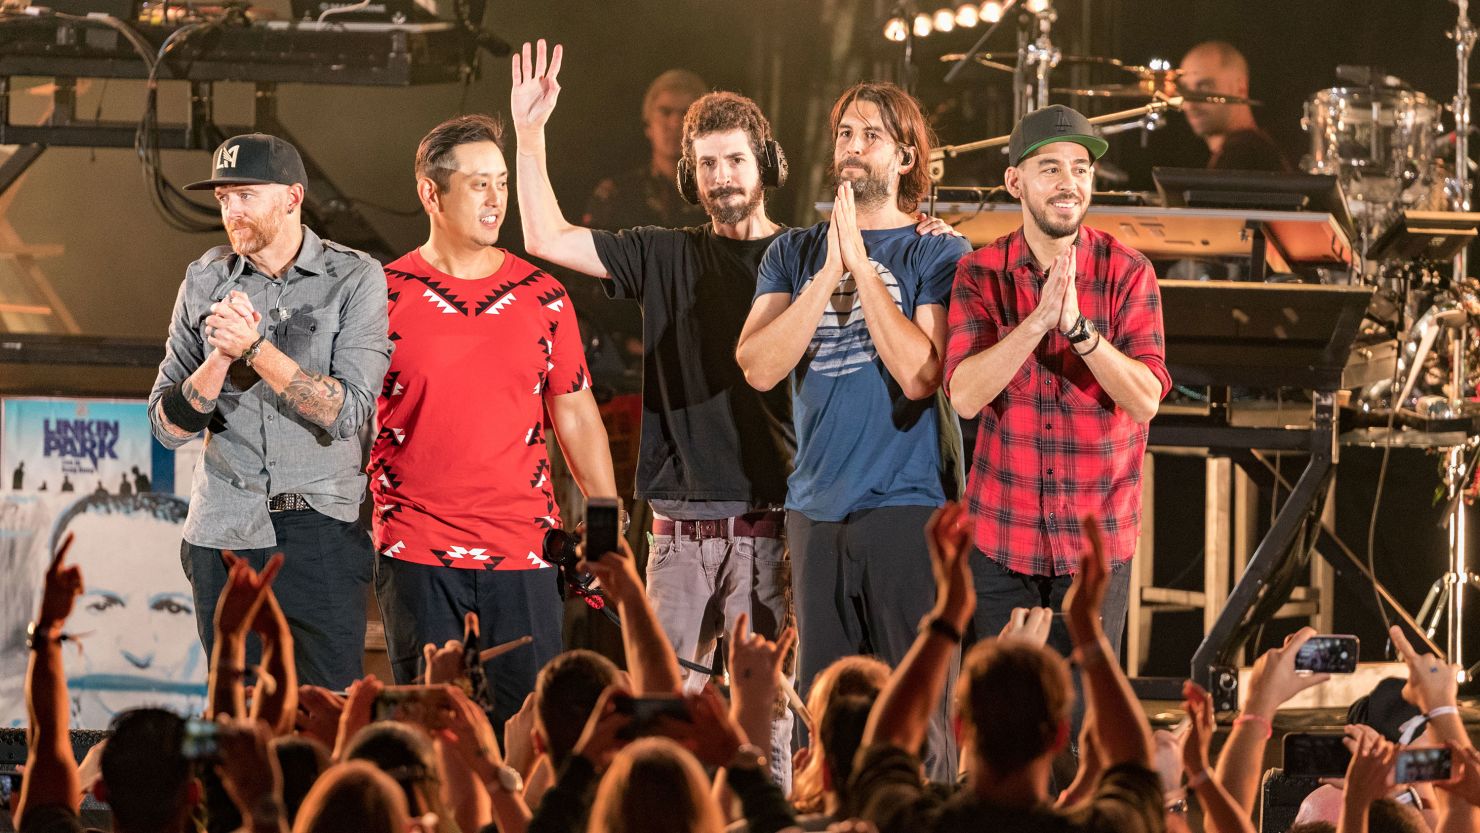 Dave Farrell, Joe Hahn, Brad Delsen, Rob Bourdon and Mike Shinoda perform during the "Linkin Park And Friends Celebrate Life In Honor Of Chester Bennington" event in October 2017.